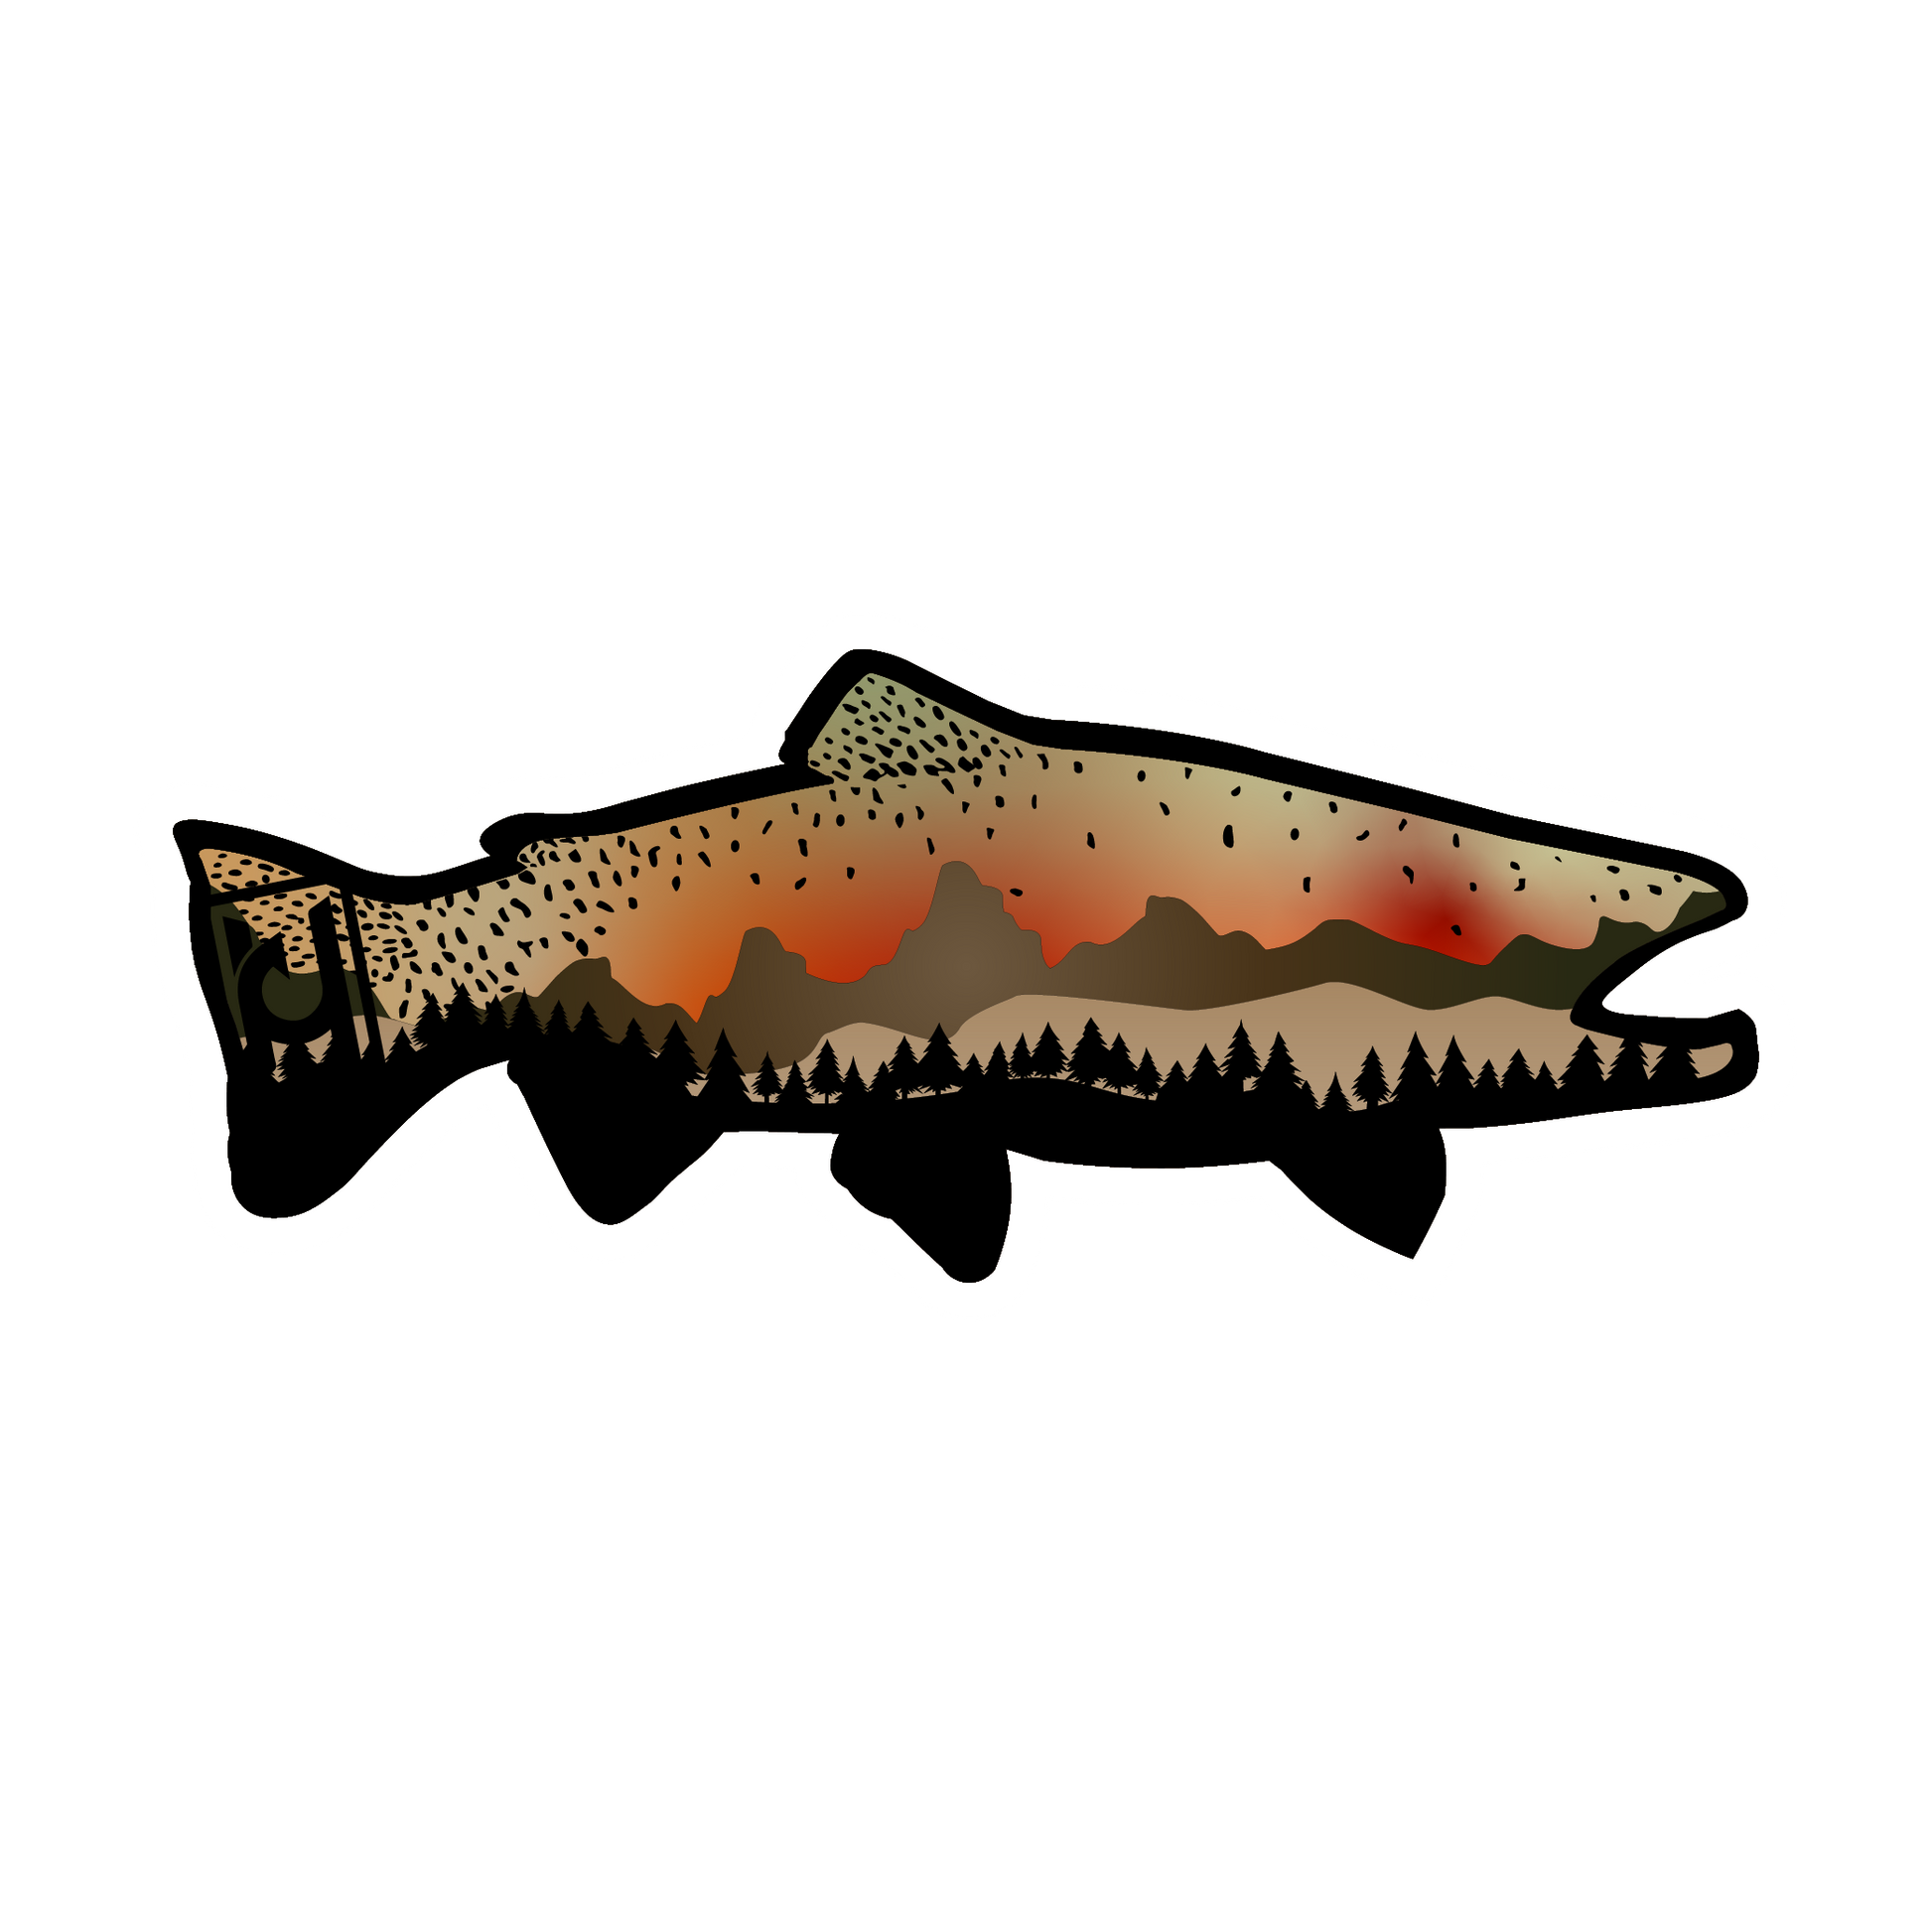 Cutthroat Trout sticker modeled after our wood art! Includes the beautiful features of the Cutthroat accented with mountains and pine trees.